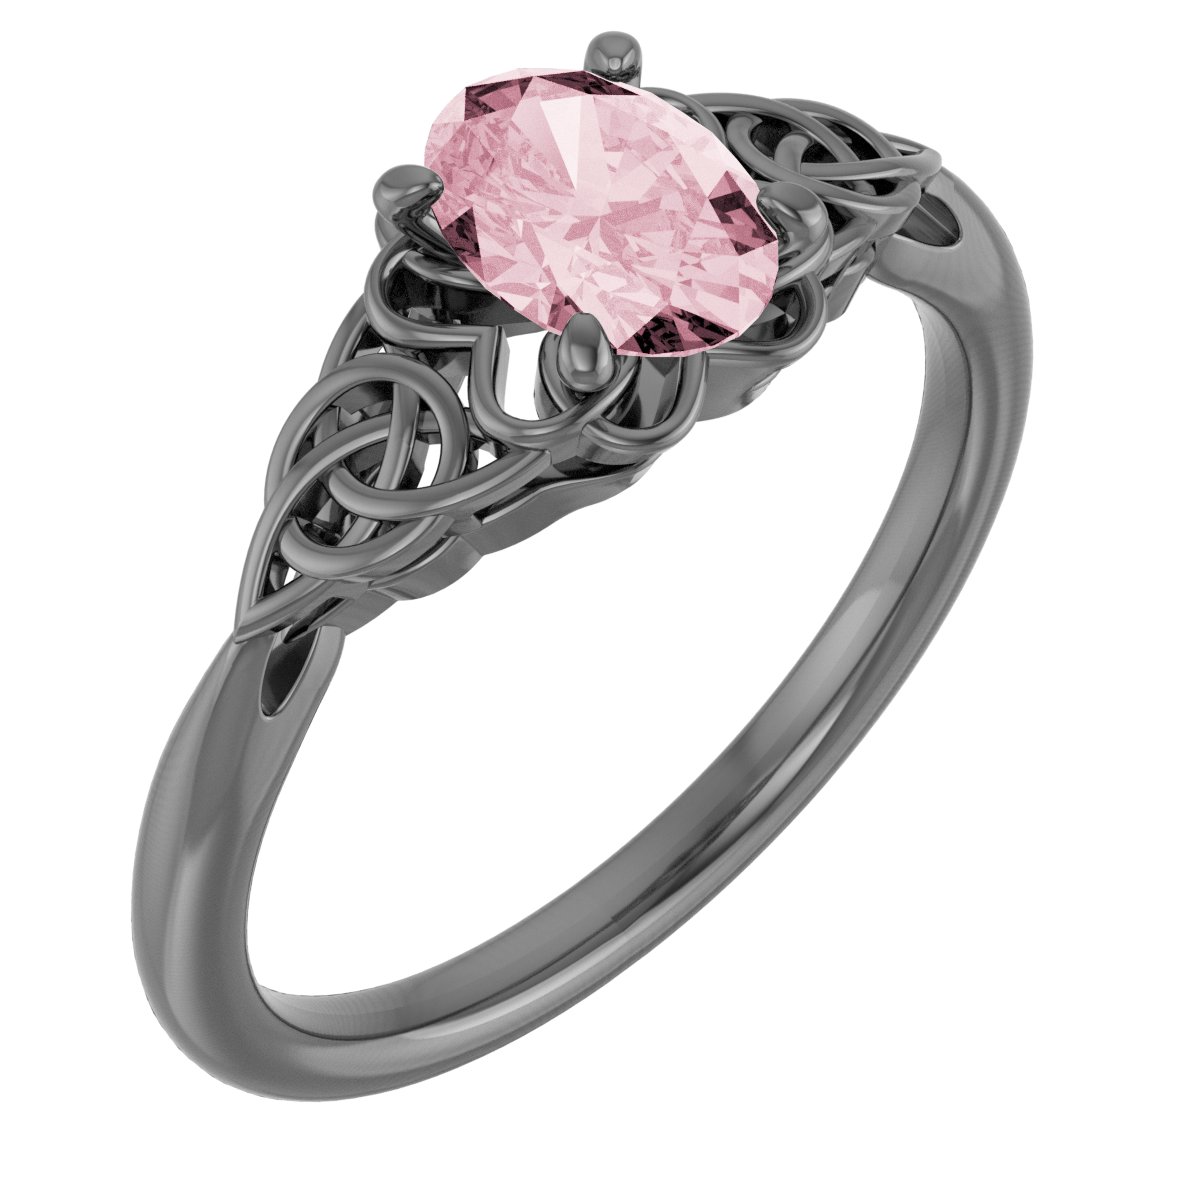 Celtic-Inspired Solitaire Ring